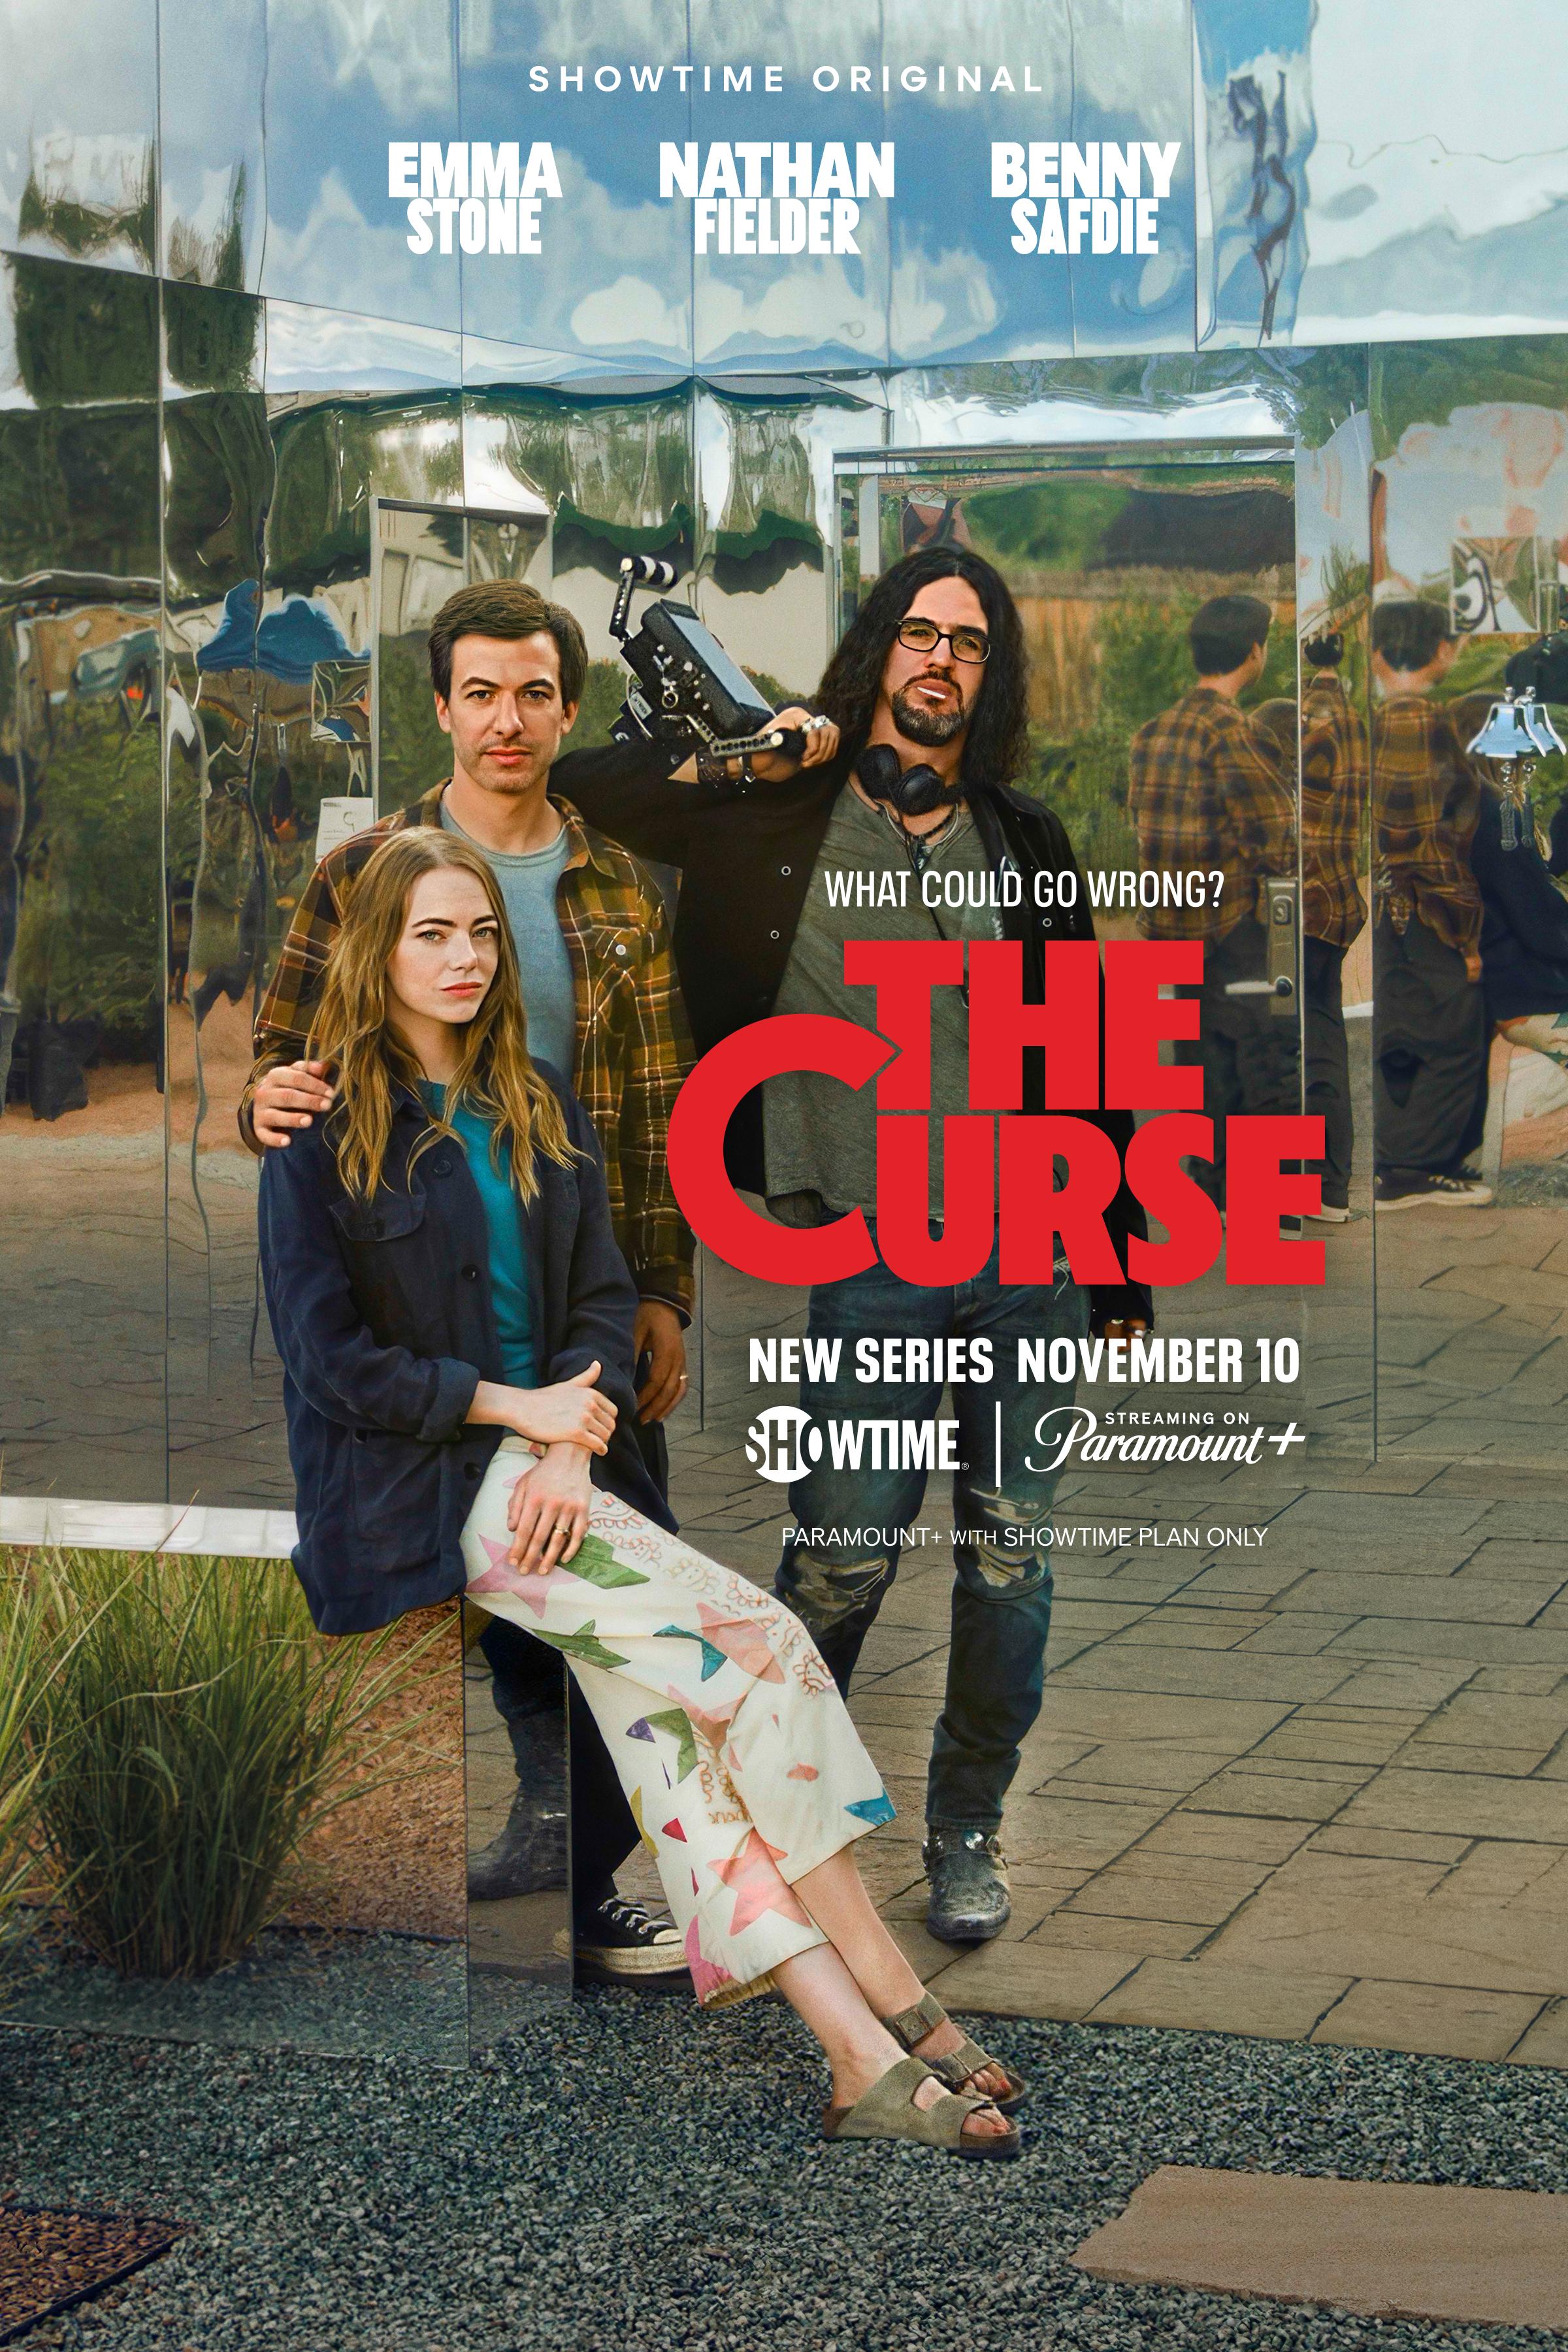 The Curse (December 29) - Streaming on Lionsgate PlayThe Curse delves into the lives of Whitney and Asher Siegel, grappling with an alleged curse as they attempt to conceive a child while starring in their new HGTV show, “Flipanthropy,” amidst complications from an eccentric reality TV producer.